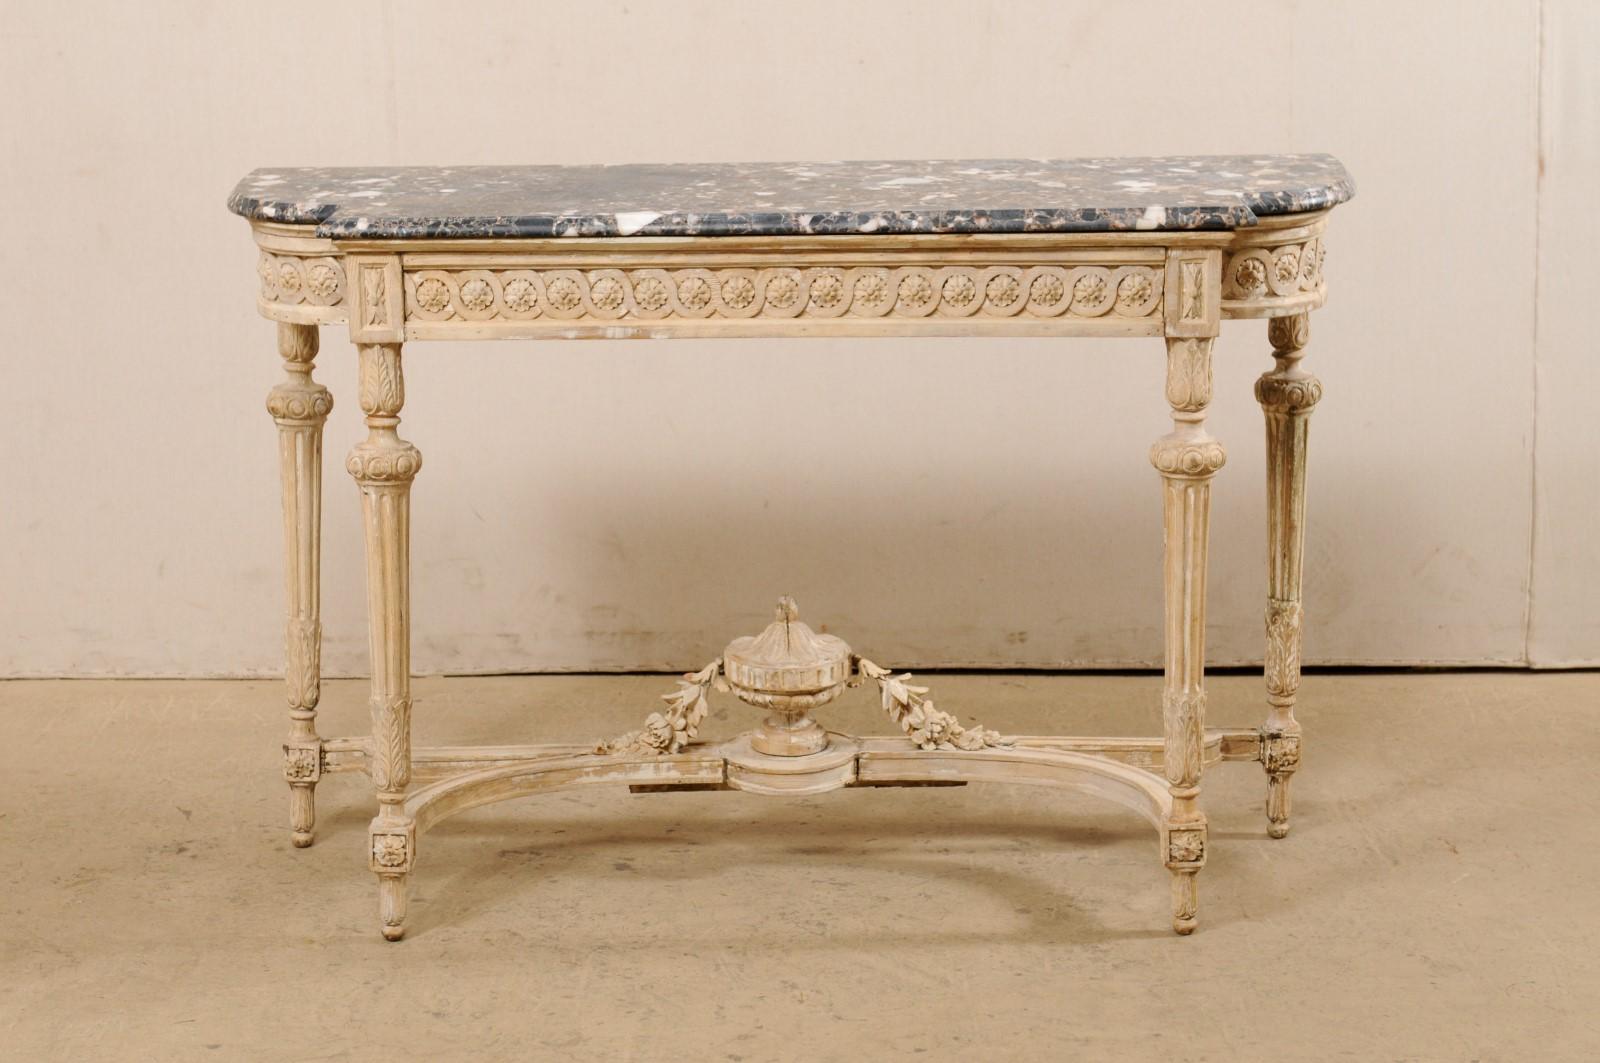 A French marble-top console table, with carved urn finial accent at underside, from the 19th century. This antique table from France features an oblong shaped top with flattened backside and curved and stepped out shaped front. The marble top is